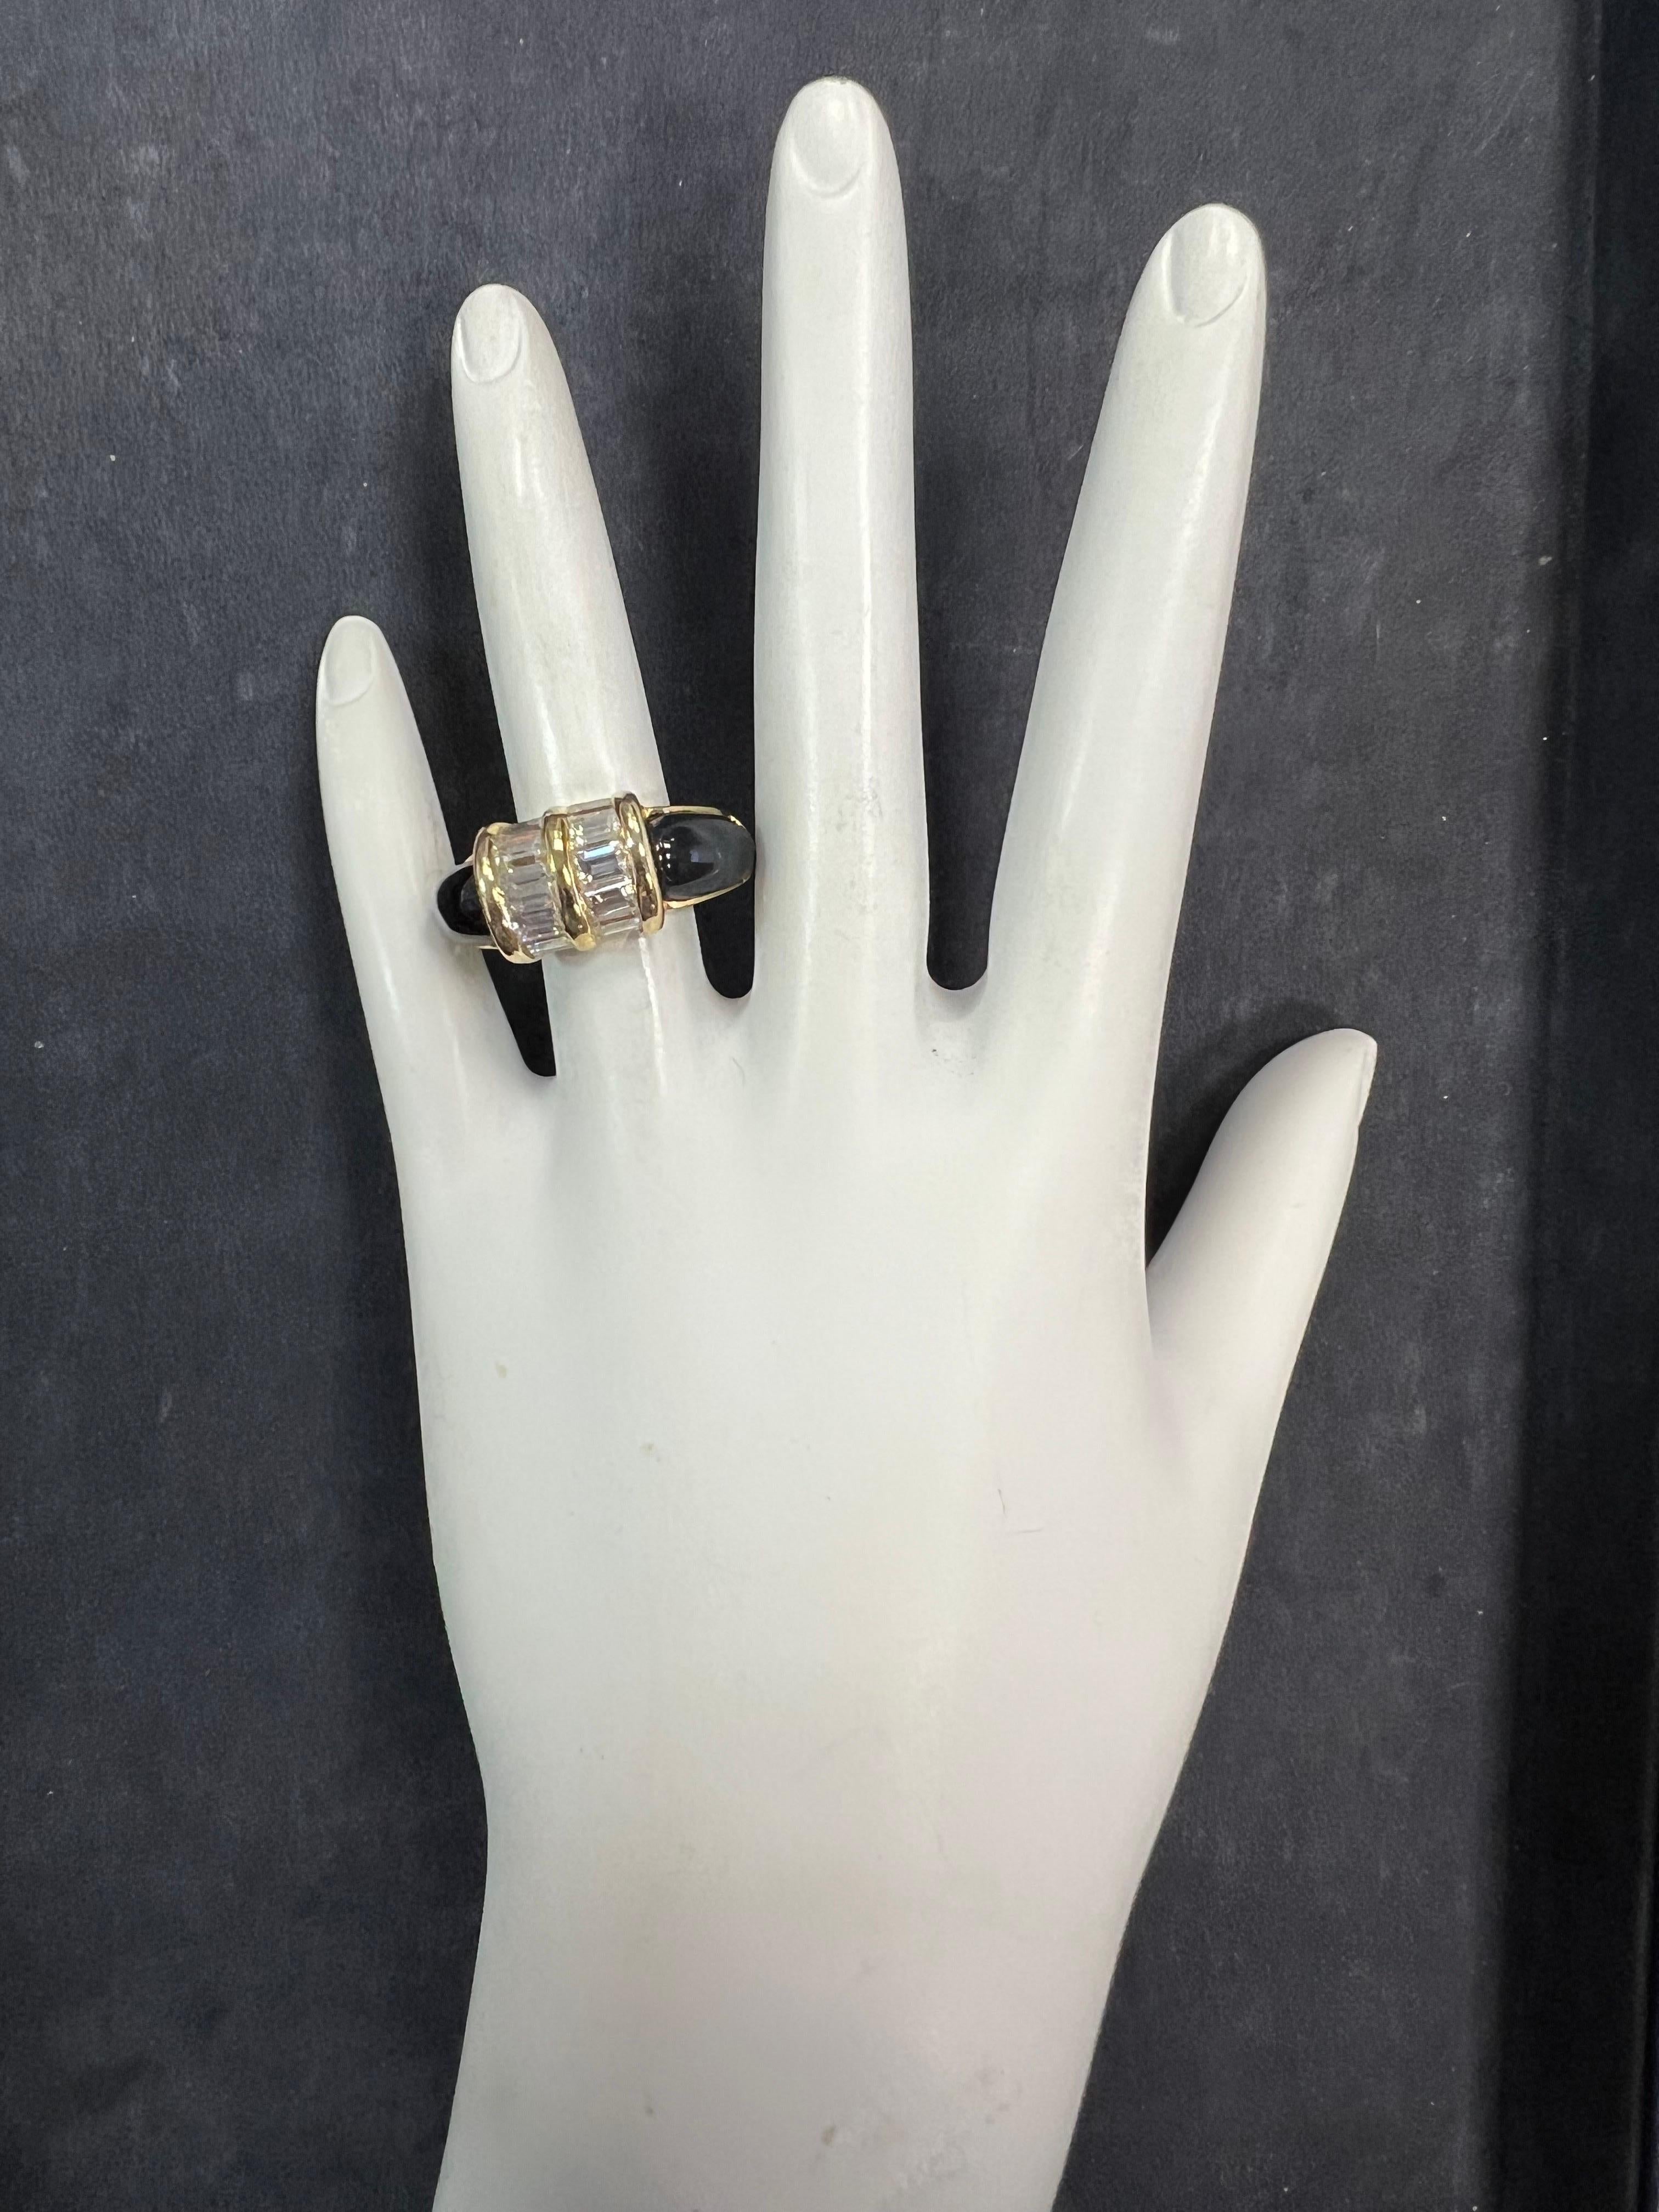 A stunning retro 18k yellow gold 2.50 carat natural baguette diamond and onyx cocktail ring, circa 1960.

The ring is set with ten natural baguette diamonds (approximately G-H in color, VS in clarity).

It is a size 7.25 and weighs 14 grams total.